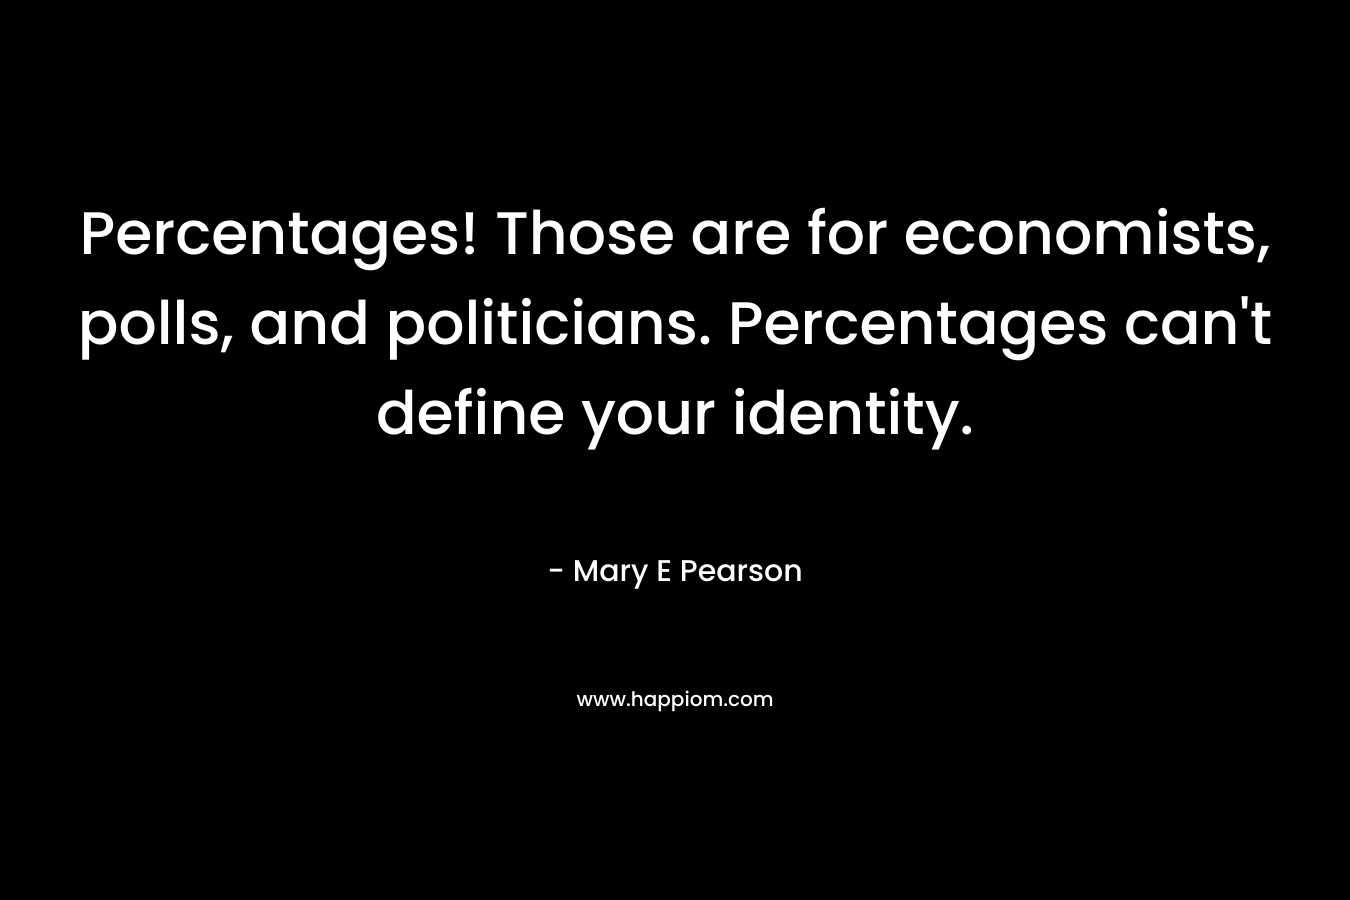 Percentages! Those are for economists, polls, and politicians. Percentages can't define your identity.